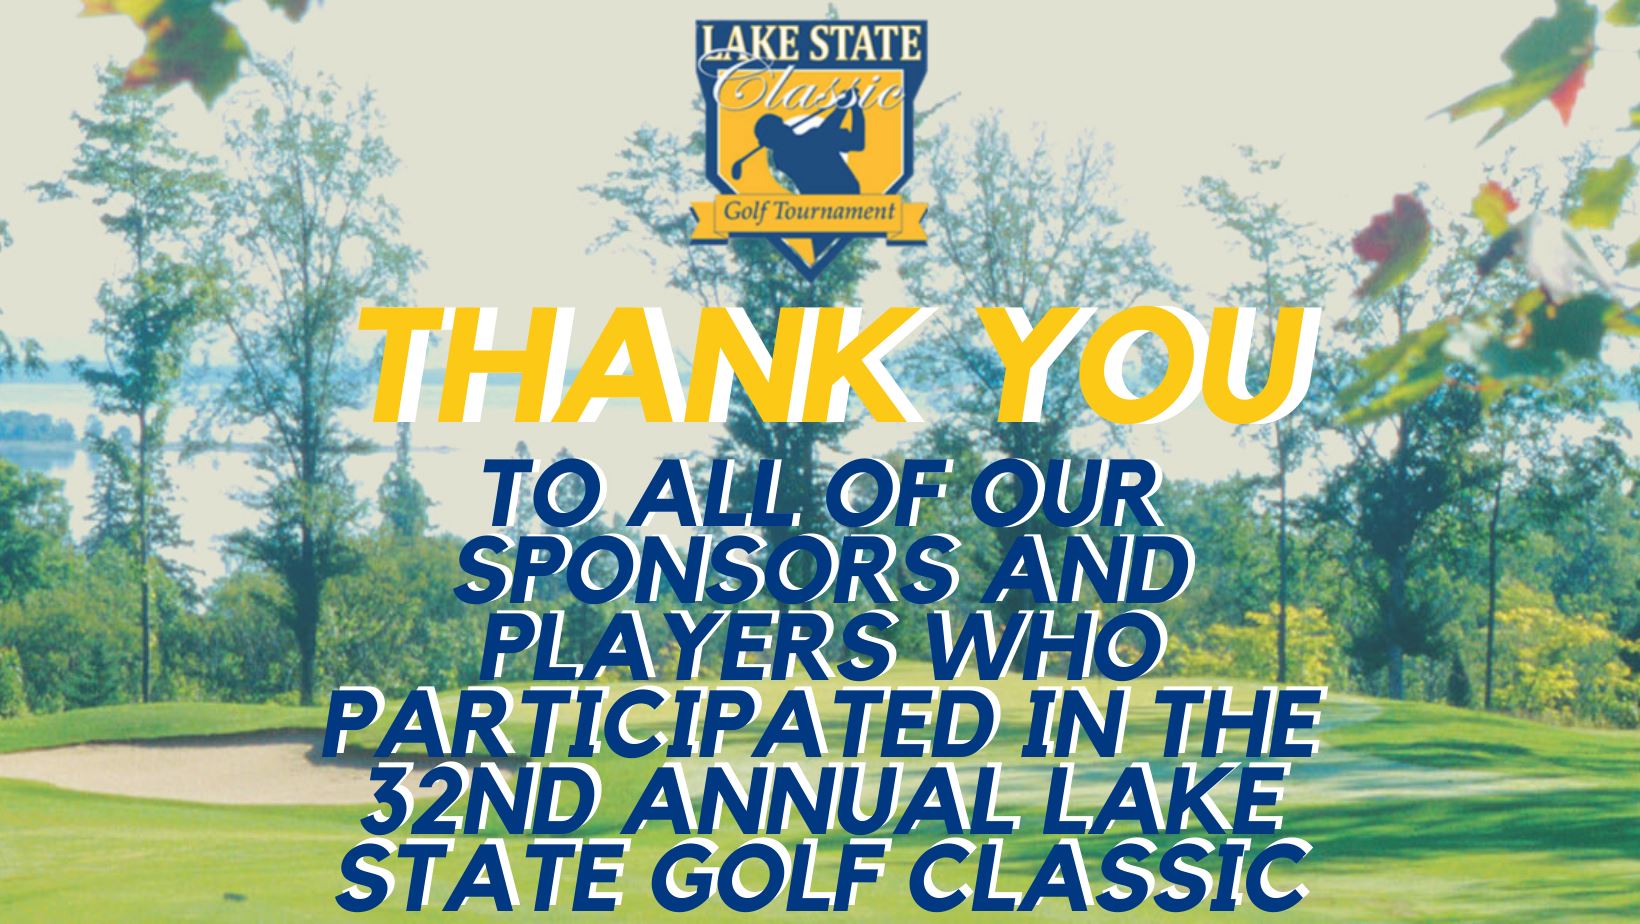 Thank you to sponsors and players of the Lake State Classic